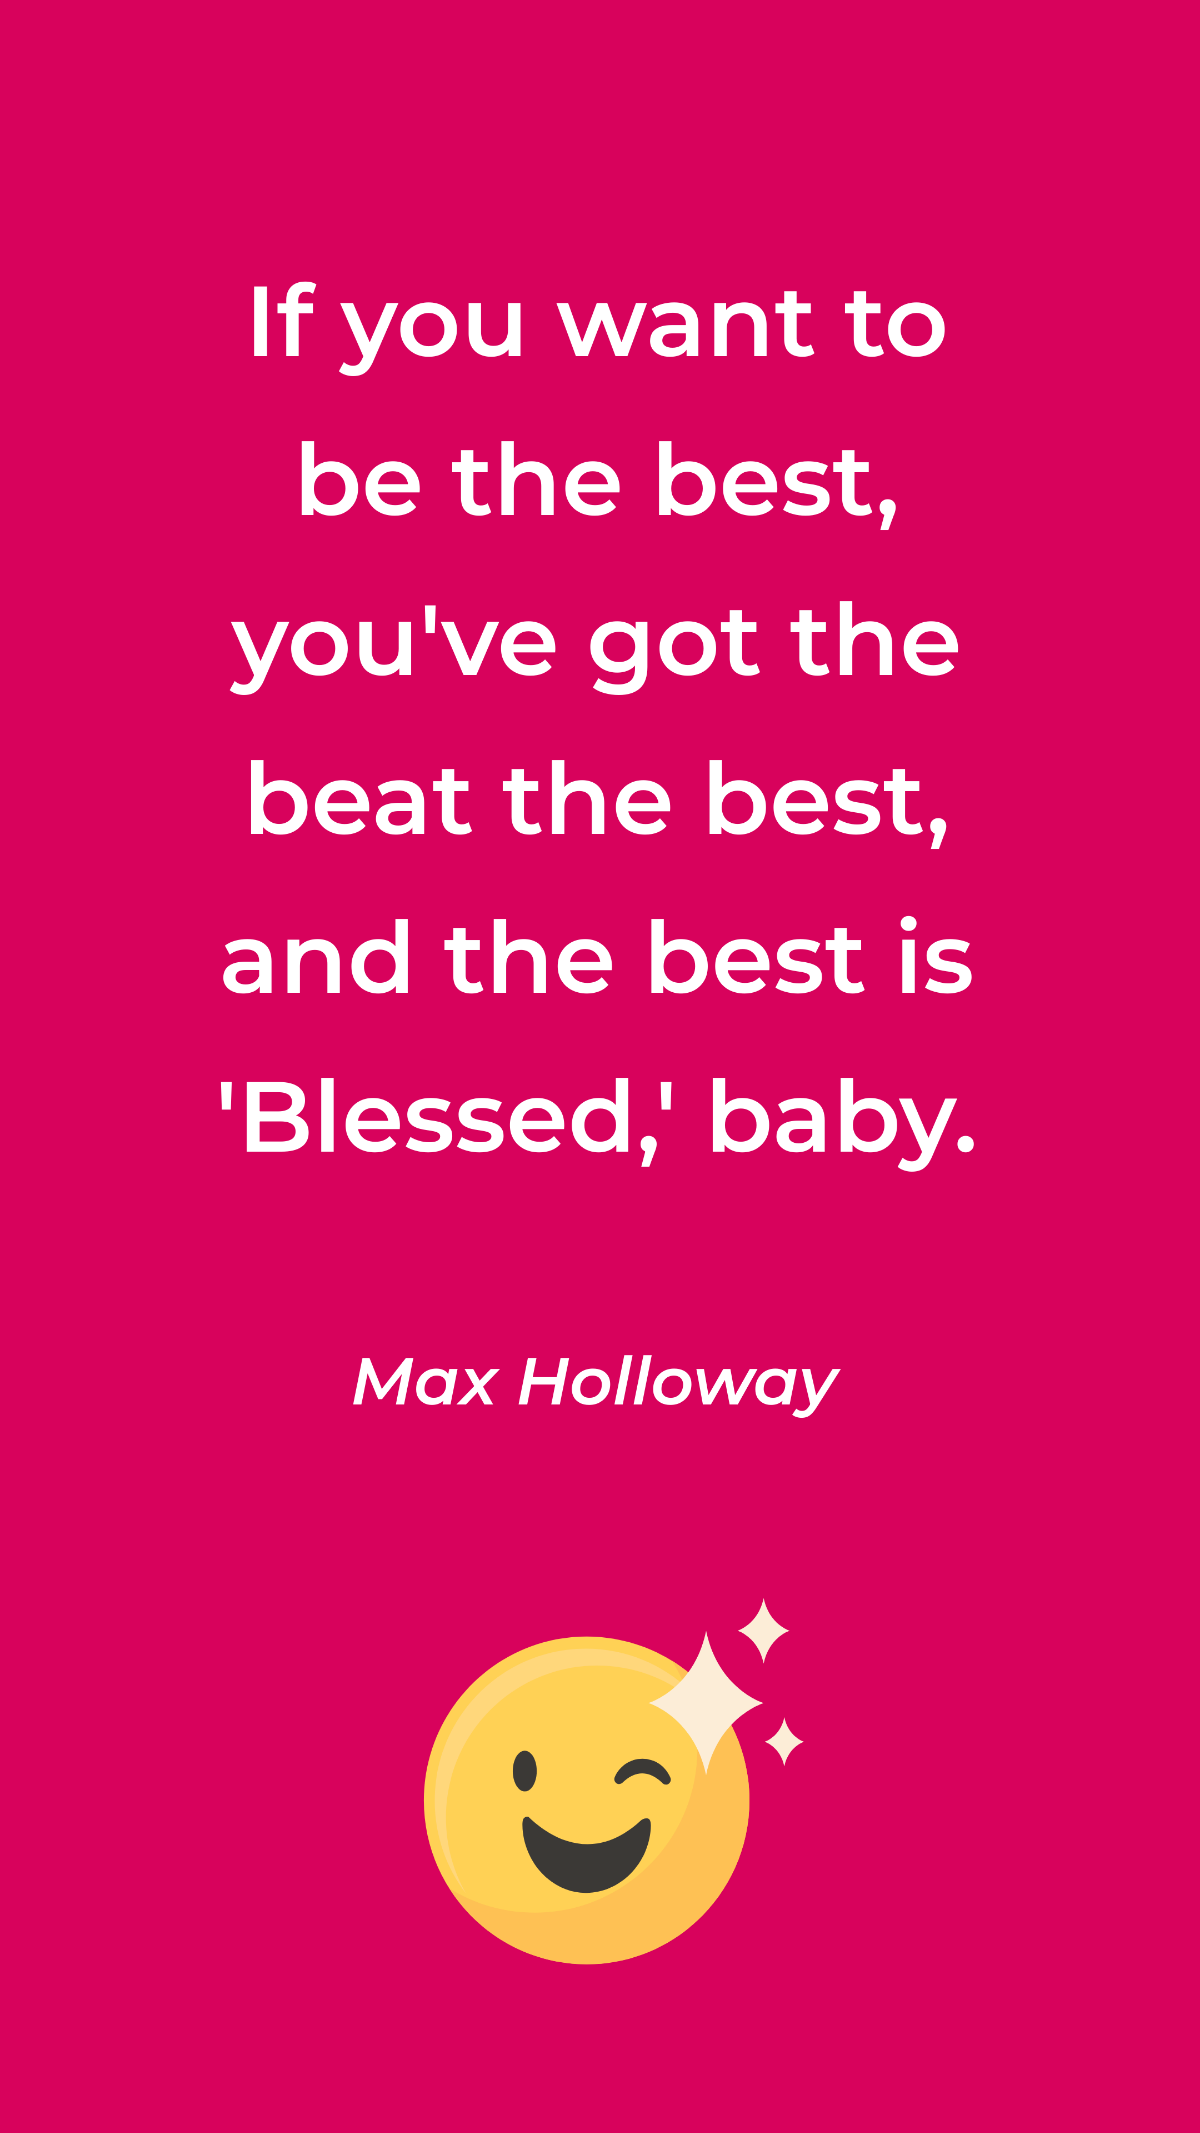 Free Max Holloway - If you want to be the best, you've got the beat the best, and the best is 'Blessed,' baby. Template